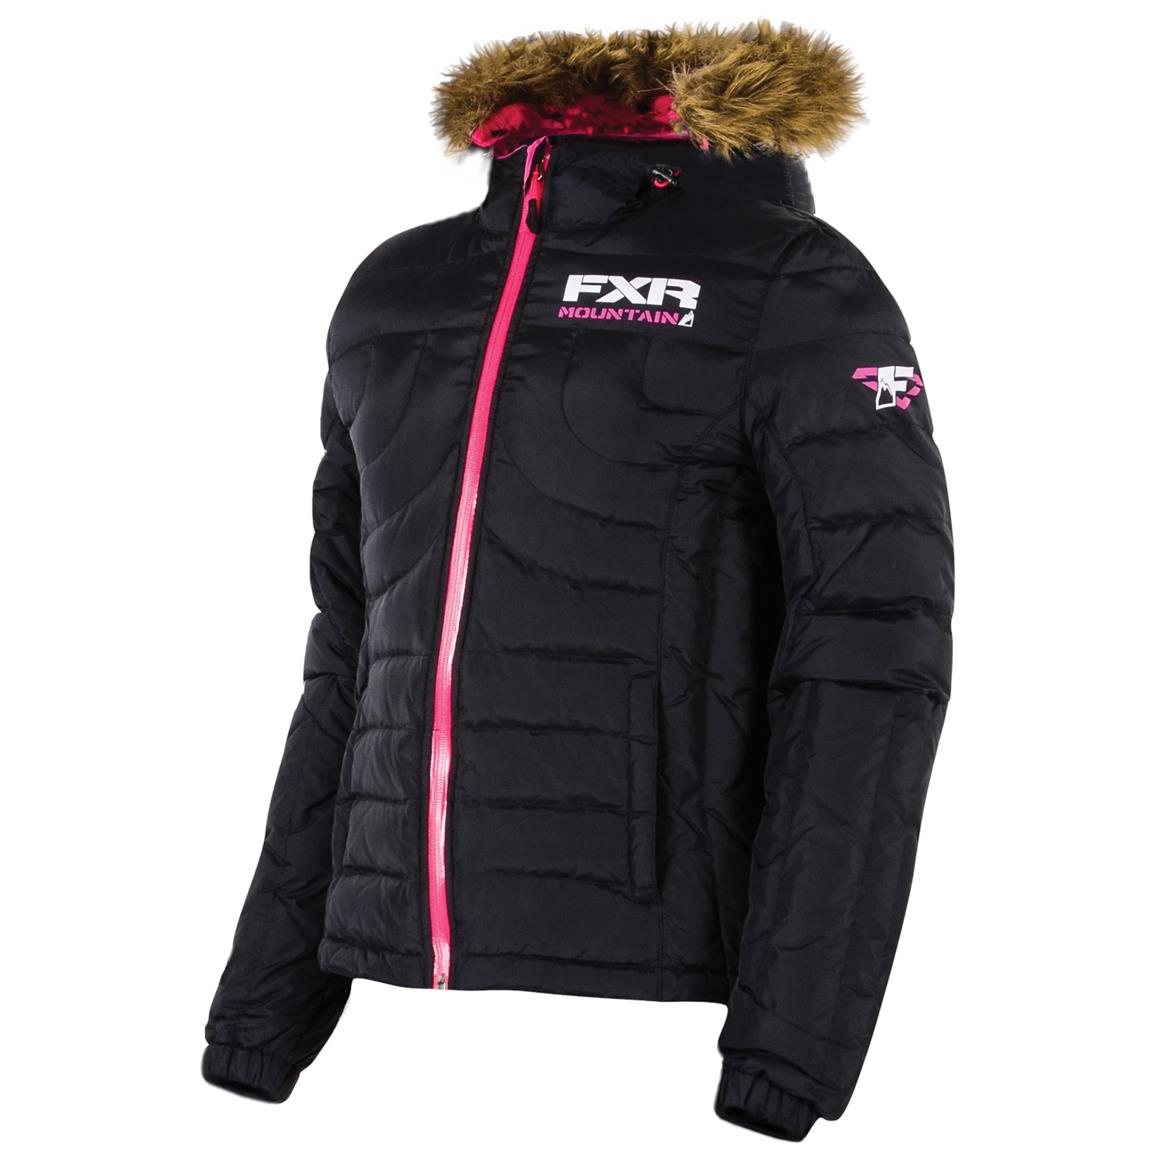 Women's FXR Fuze Waterproof Insulated Down Jacket - 637581, Snowmobile Clothing at Sportsman's Guide